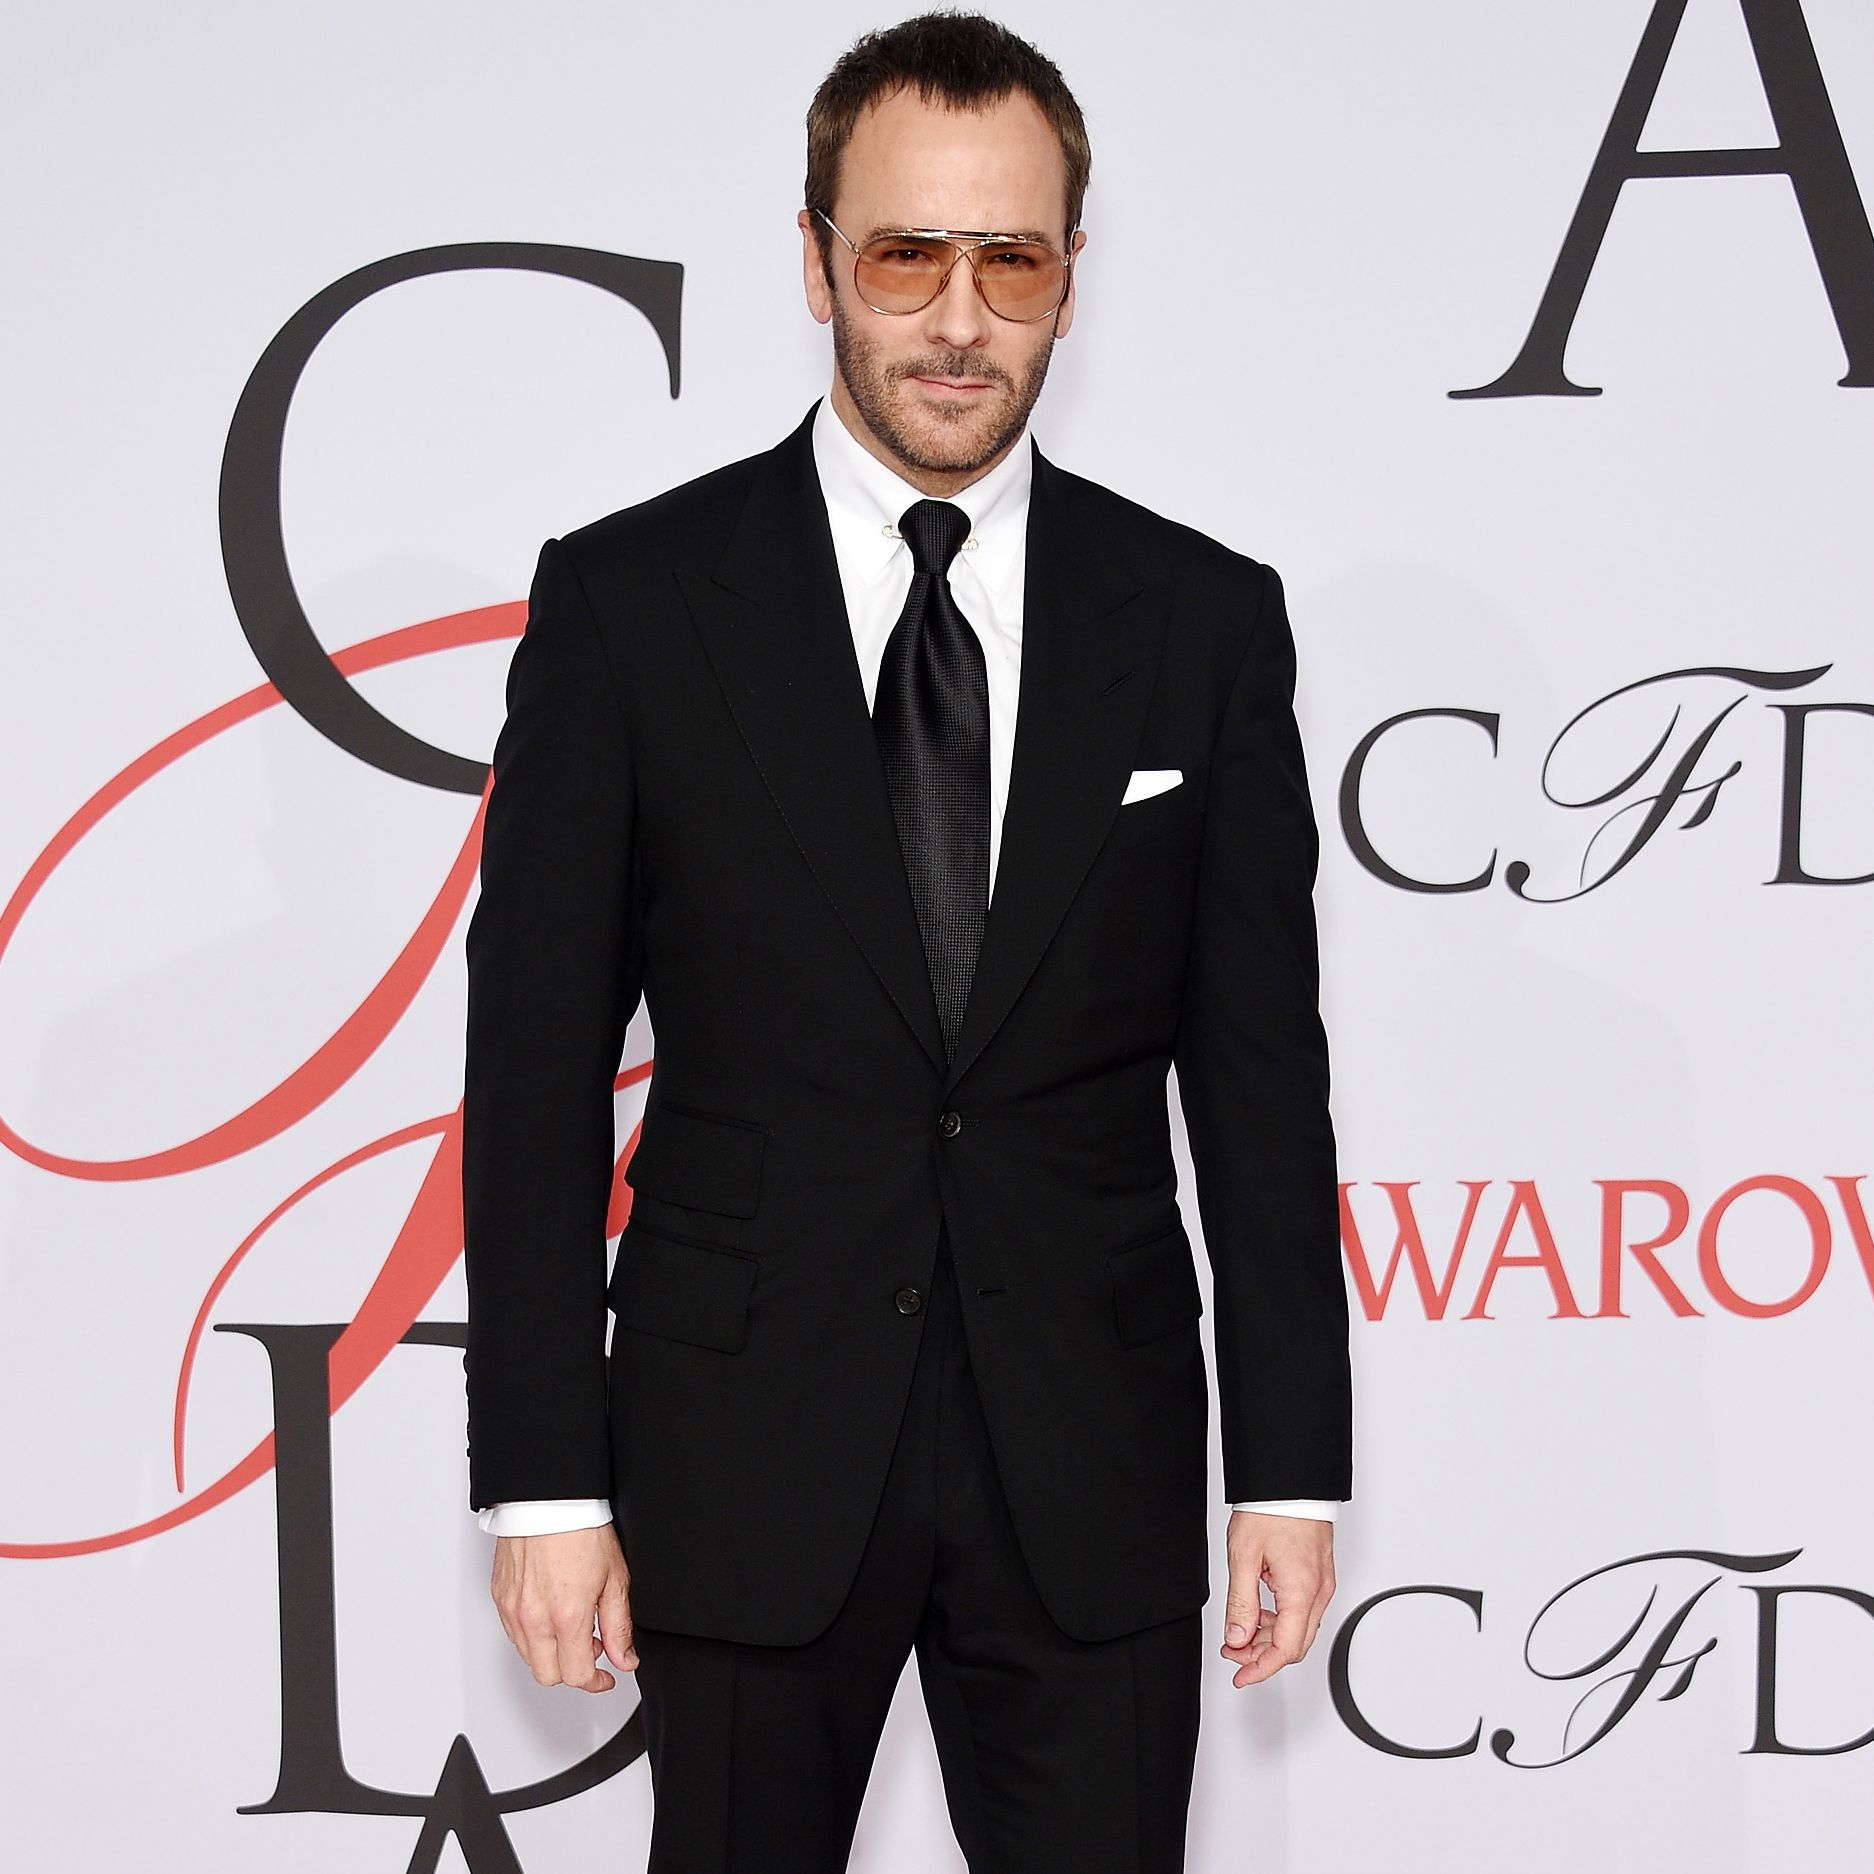 Tom Ford Becomes Chairman of Council of Fashion Designers of America ...